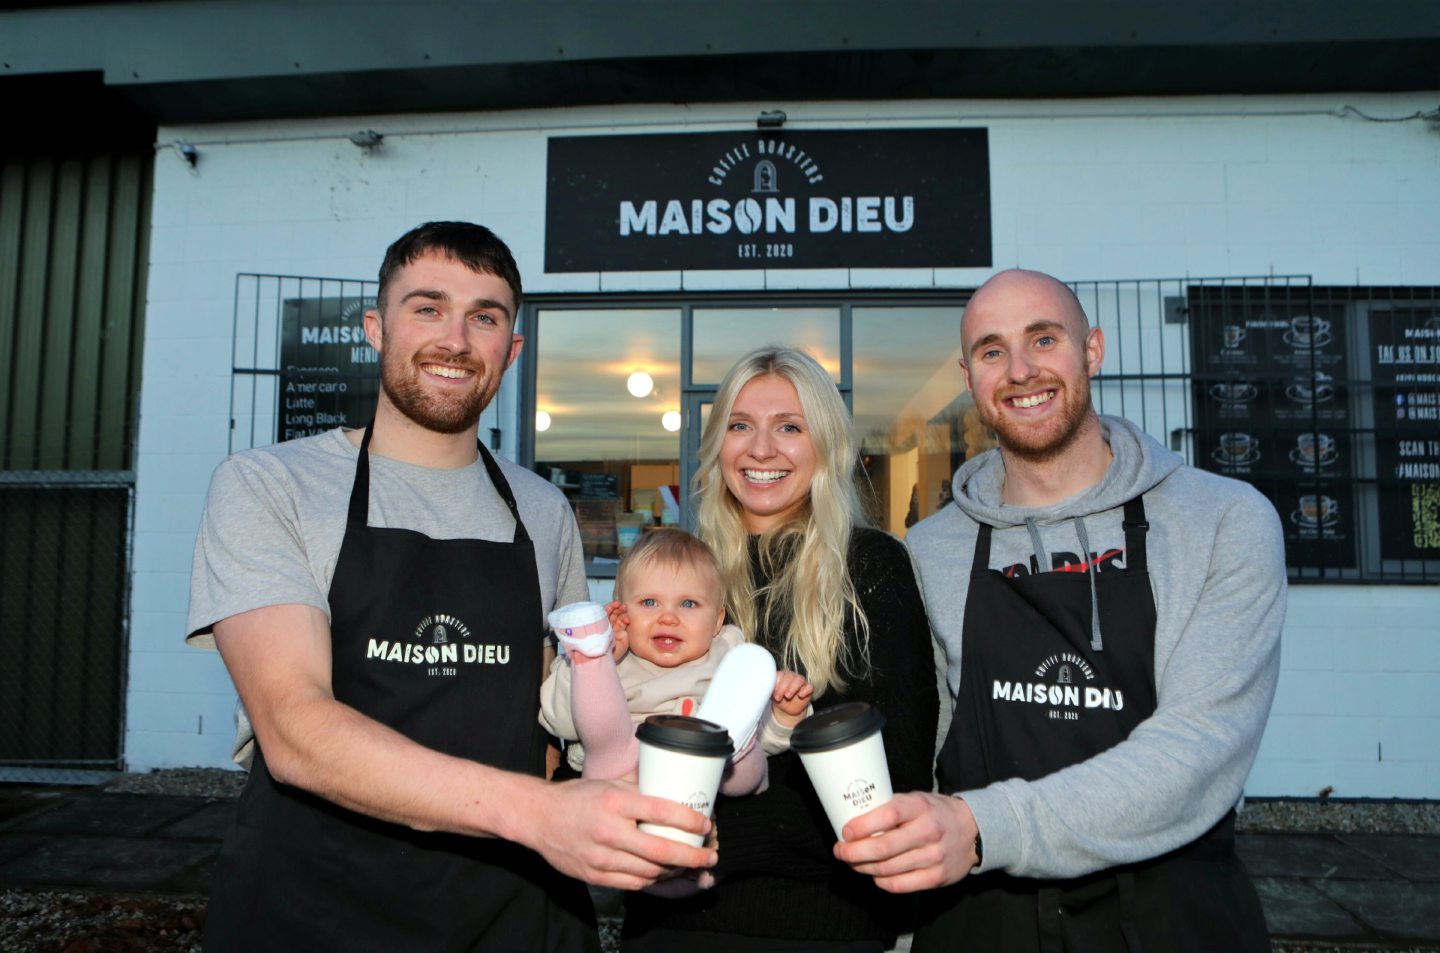 Spark (right) with partner Kayley, daughter Myla and business partner John Souttar outside their Maison Dieu business. Image: DC Thomson/Gareth Jennings.